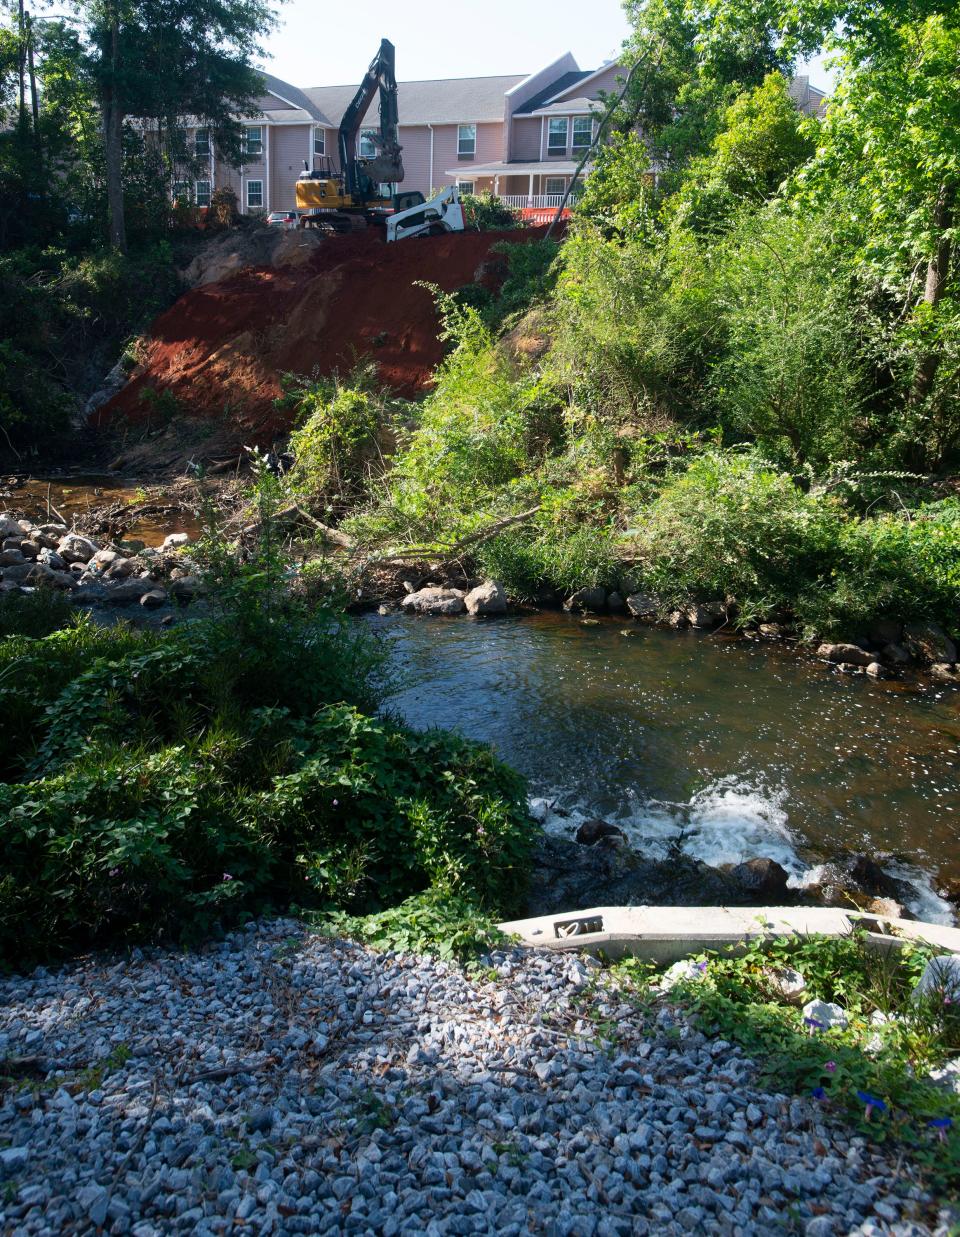 A contractor pushes red clay over an embankment April 28, allowing the sediment to enter the Carpenter Creek watershed in an effort to stabilize a nearby parking lot.